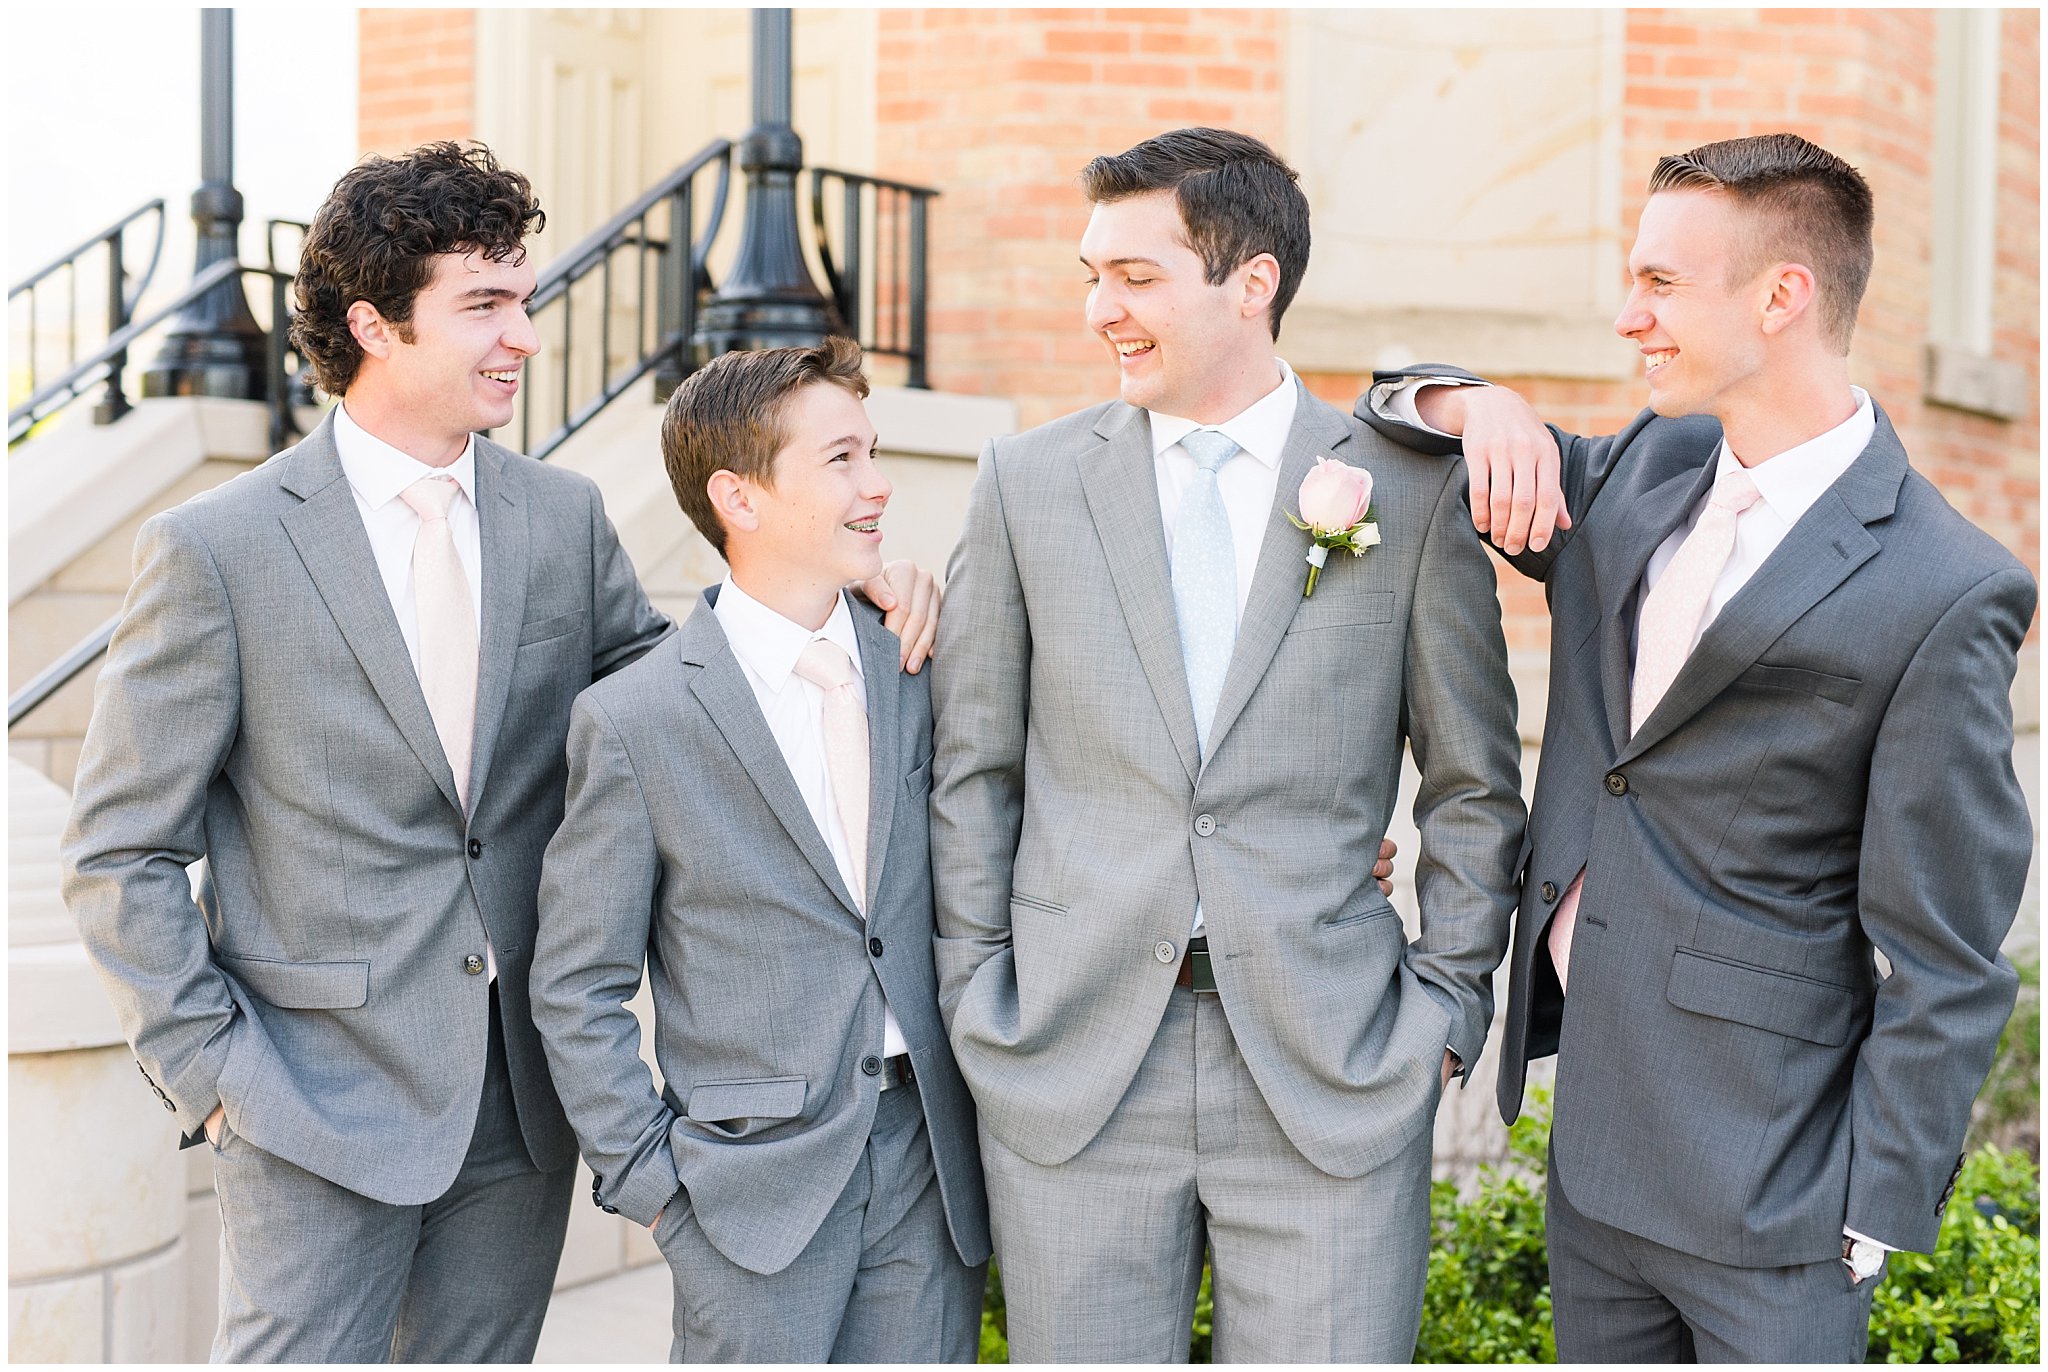 Groomsmen at Provo City Center temple with grey, blush, and light blue wedding colors | Spring Provo City Center Temple Wedding | Utah Wedding Photographers | Jessie and Dallin Photography